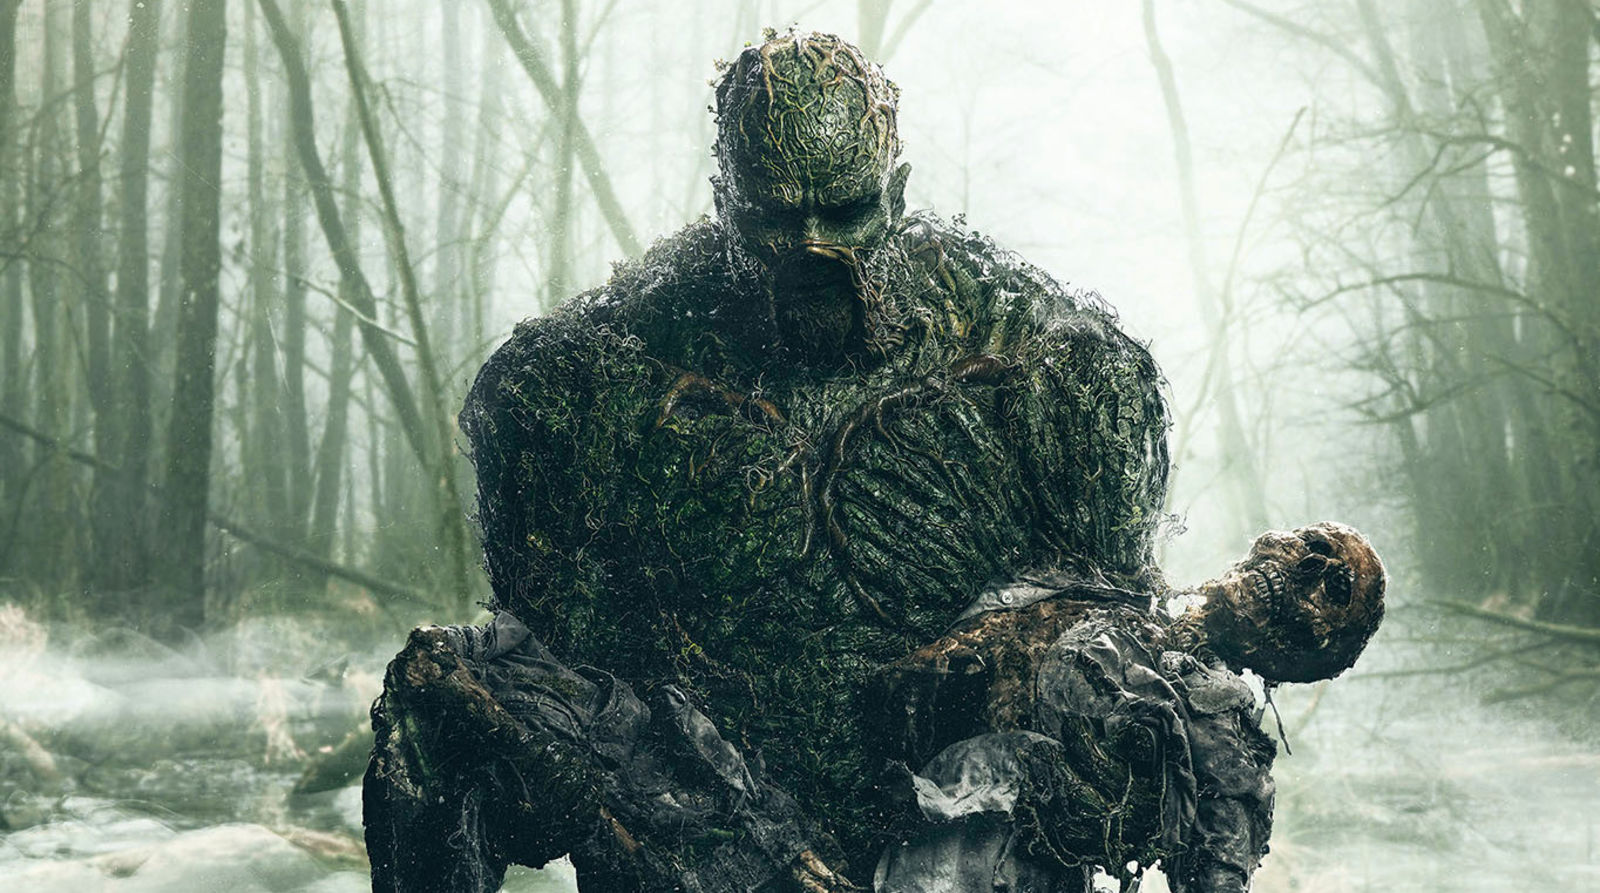 The swamp thing